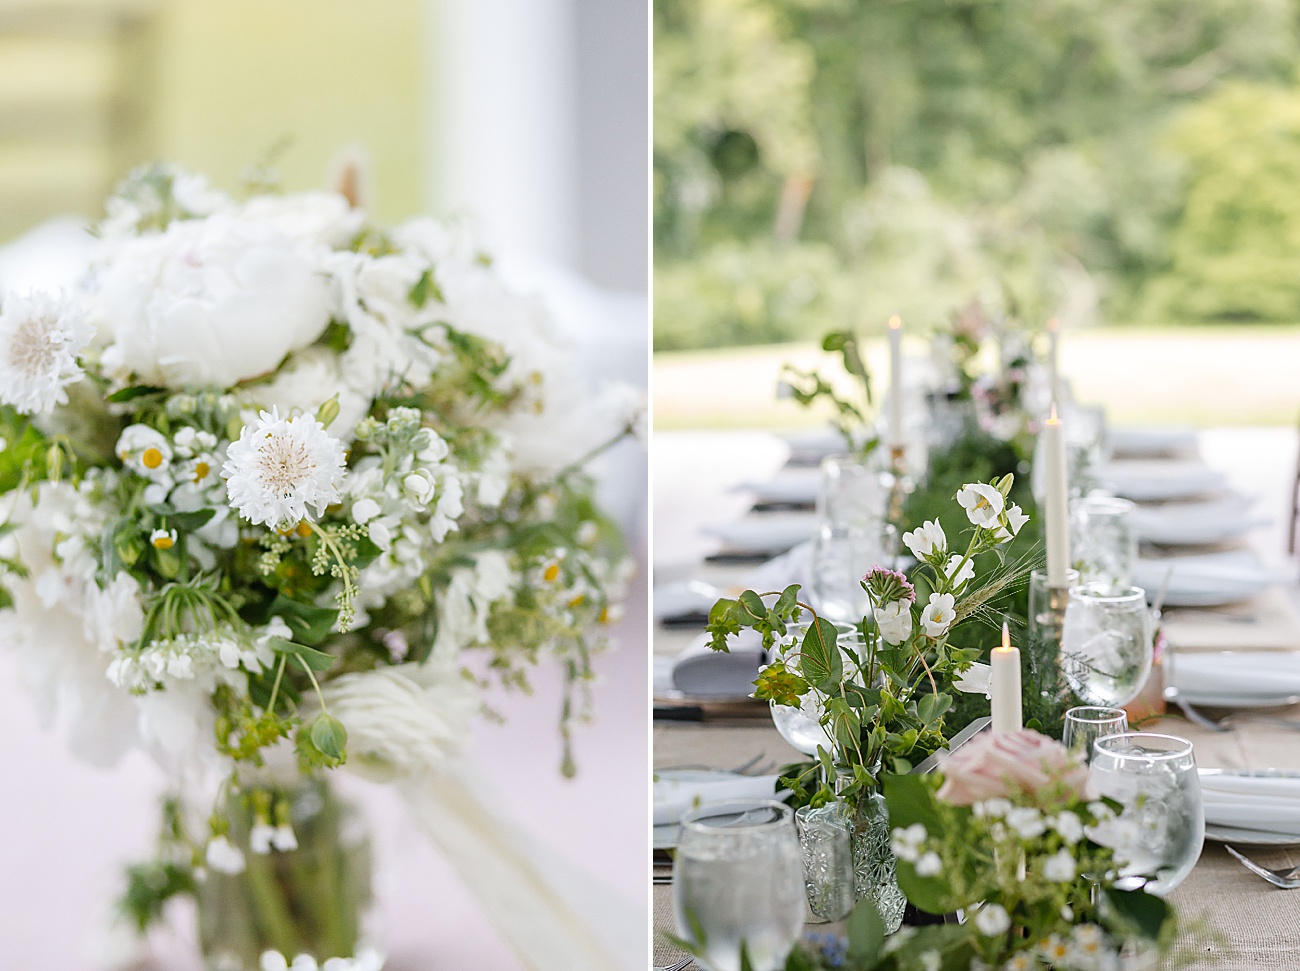 Table details at Parmelee Farm Wedding in Killlingworth CT by Jamerlyn Brown Photography